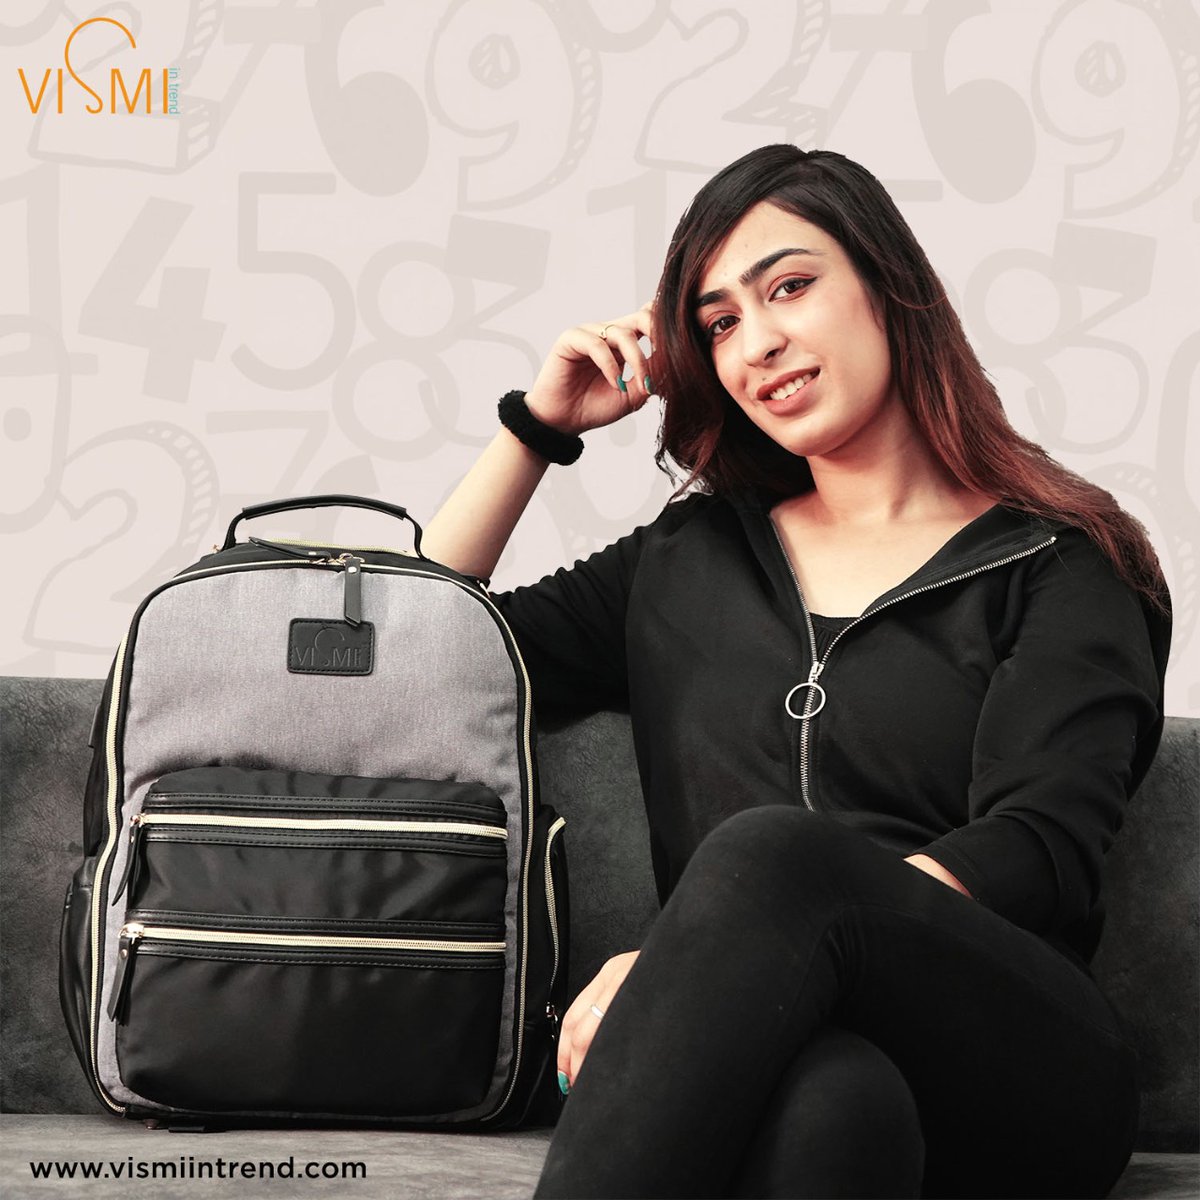 With unique and minimalistic design our latest backpacks are the perfect pick for every woman.😍 Shop the new range of backpacks from Vismiintrend today.
.
.
#vismiintrend #multifunctionalbag #lightweightbag #womenbackpack #madinindia #stylishbags #spaciousbags #trendybags